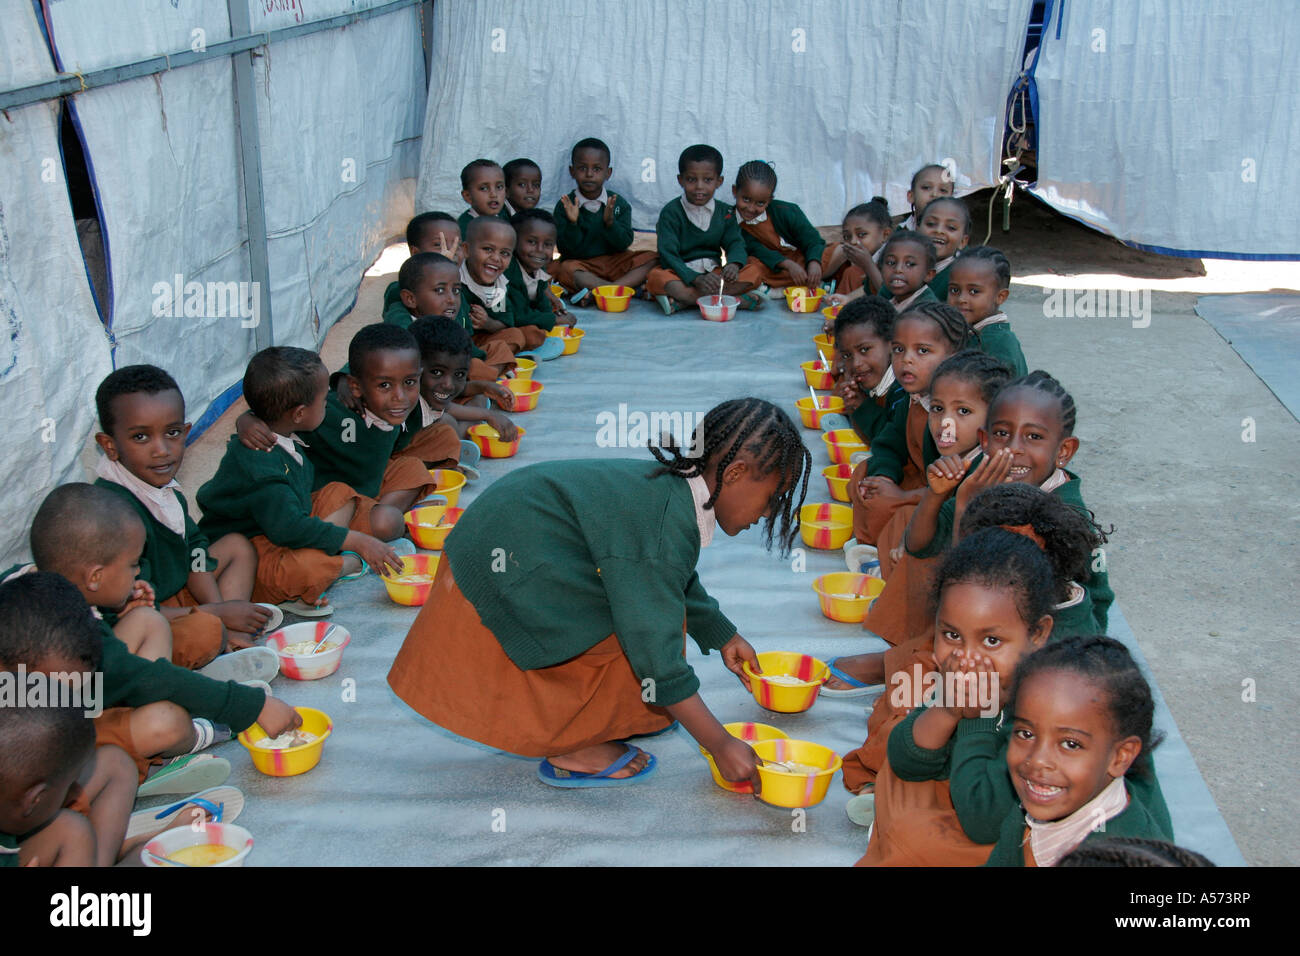 Painet jb1179 ethiopia children kids praying eating lunch bethlehem centre pre school day care addis ababa africa child kid Stock Photo